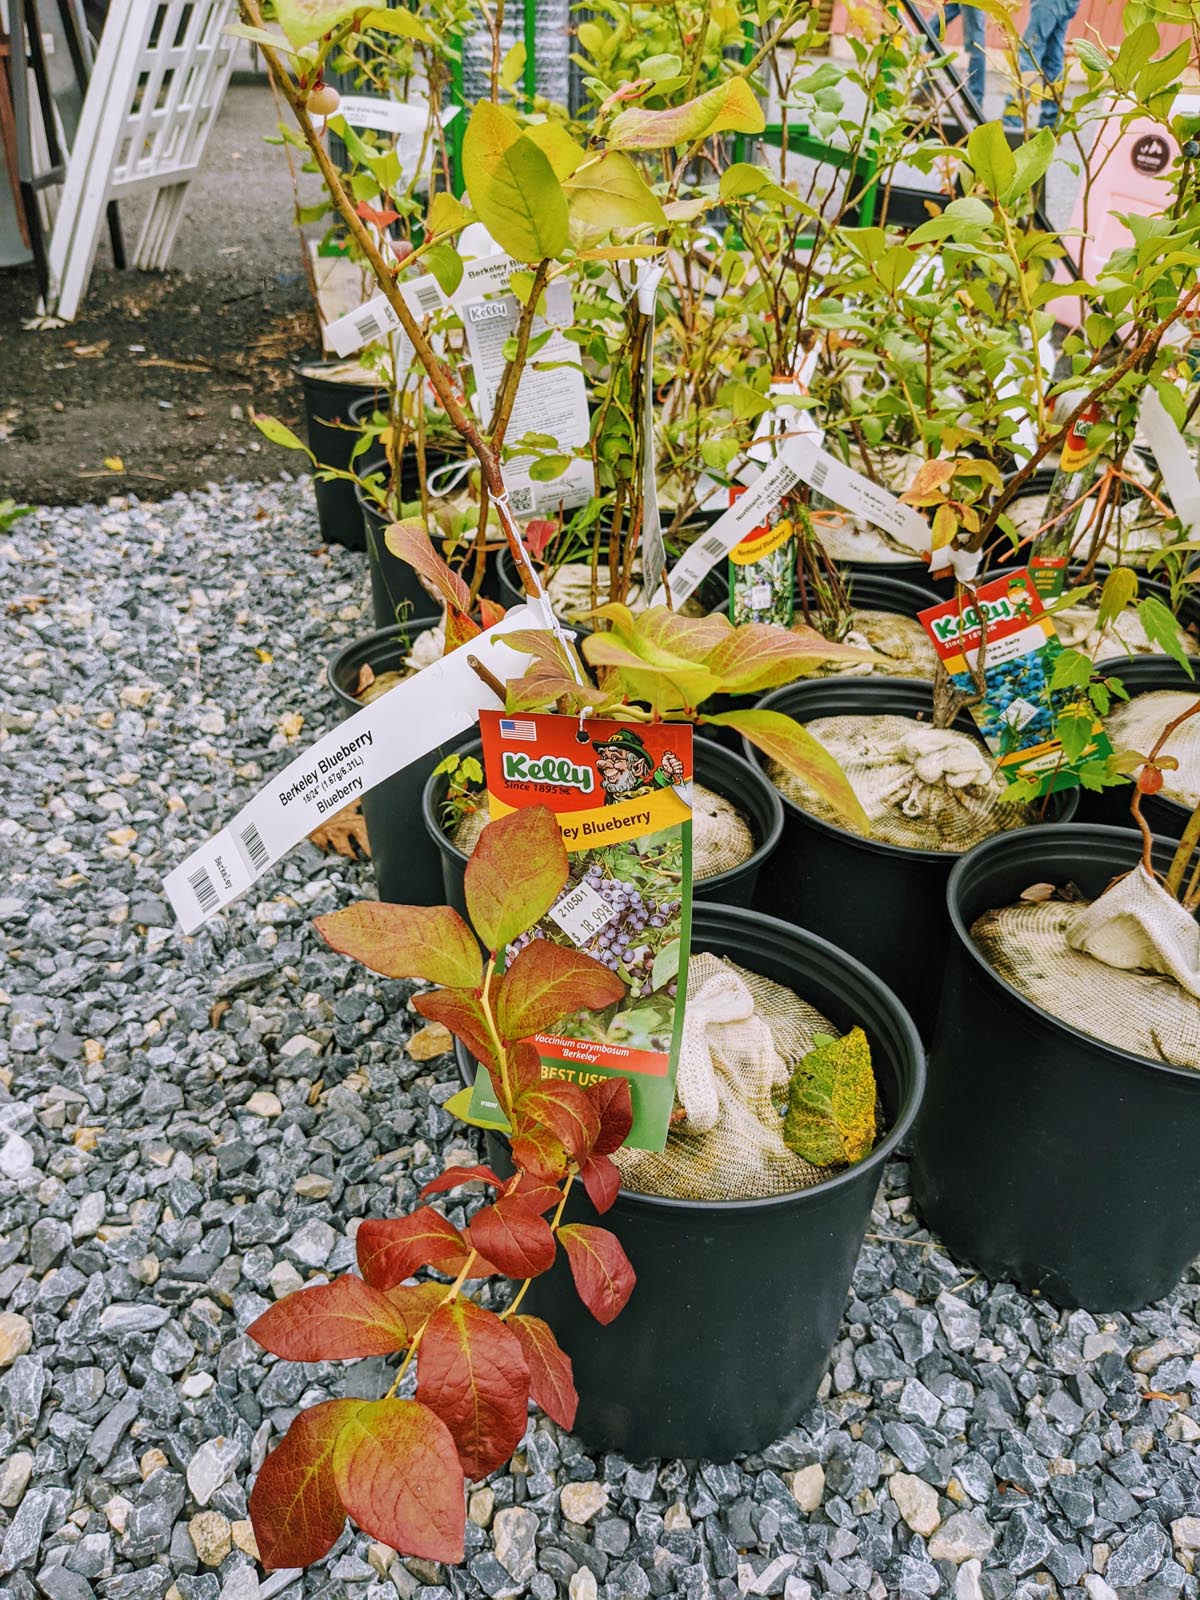 Blueberry Bushes for What to Plant in October in PA Zone 6, from Agway